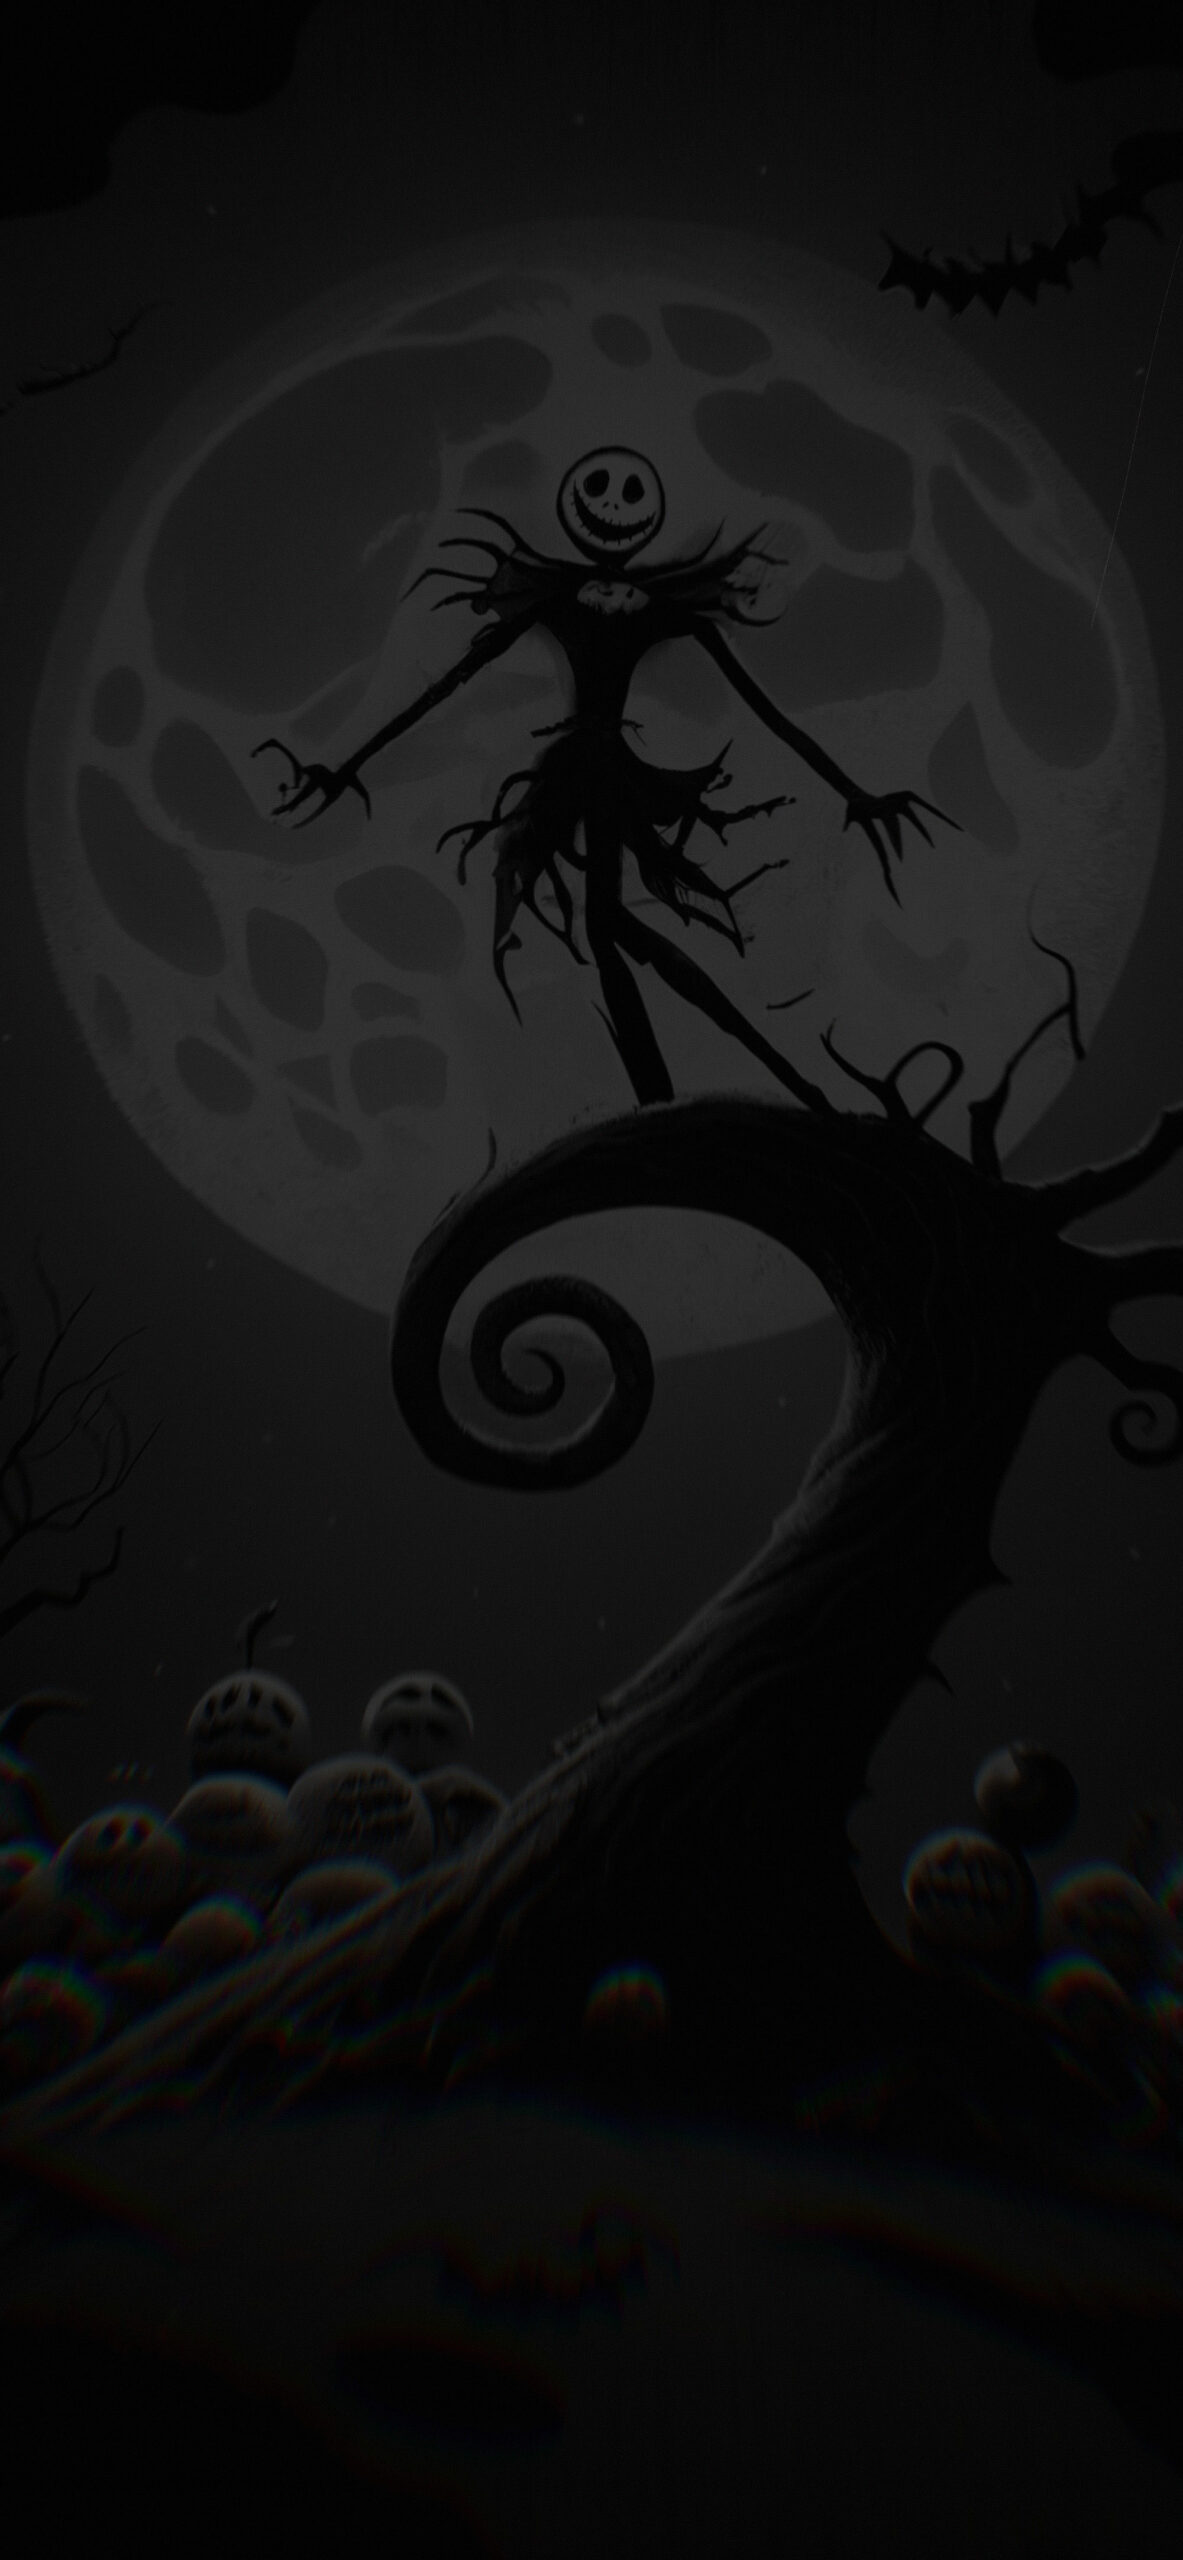 the nightmare before christmas aesthetic background